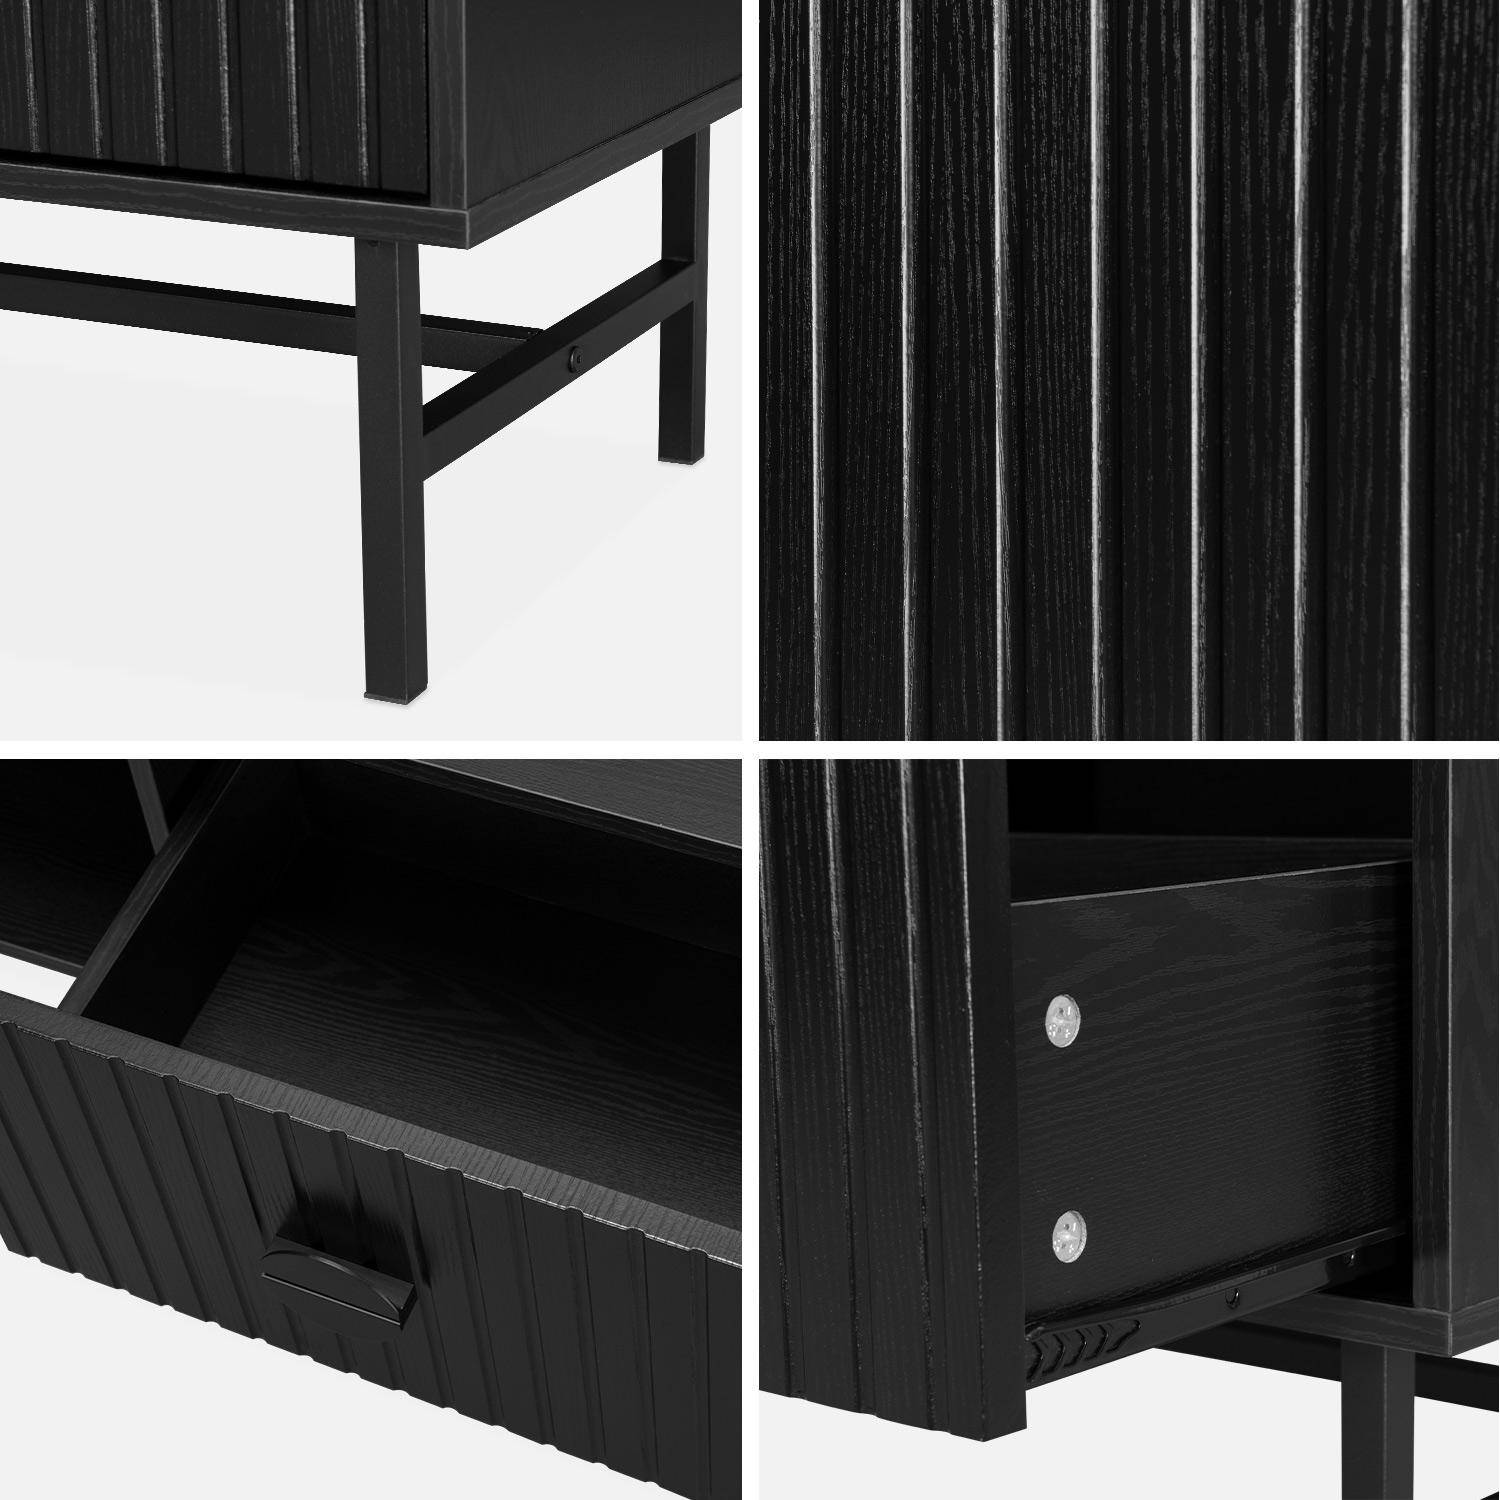 Coffee table with one drawer and one storage nook, ridged effect, industrial style, 100x59x50.2cm - Bazalt - Black Photo8